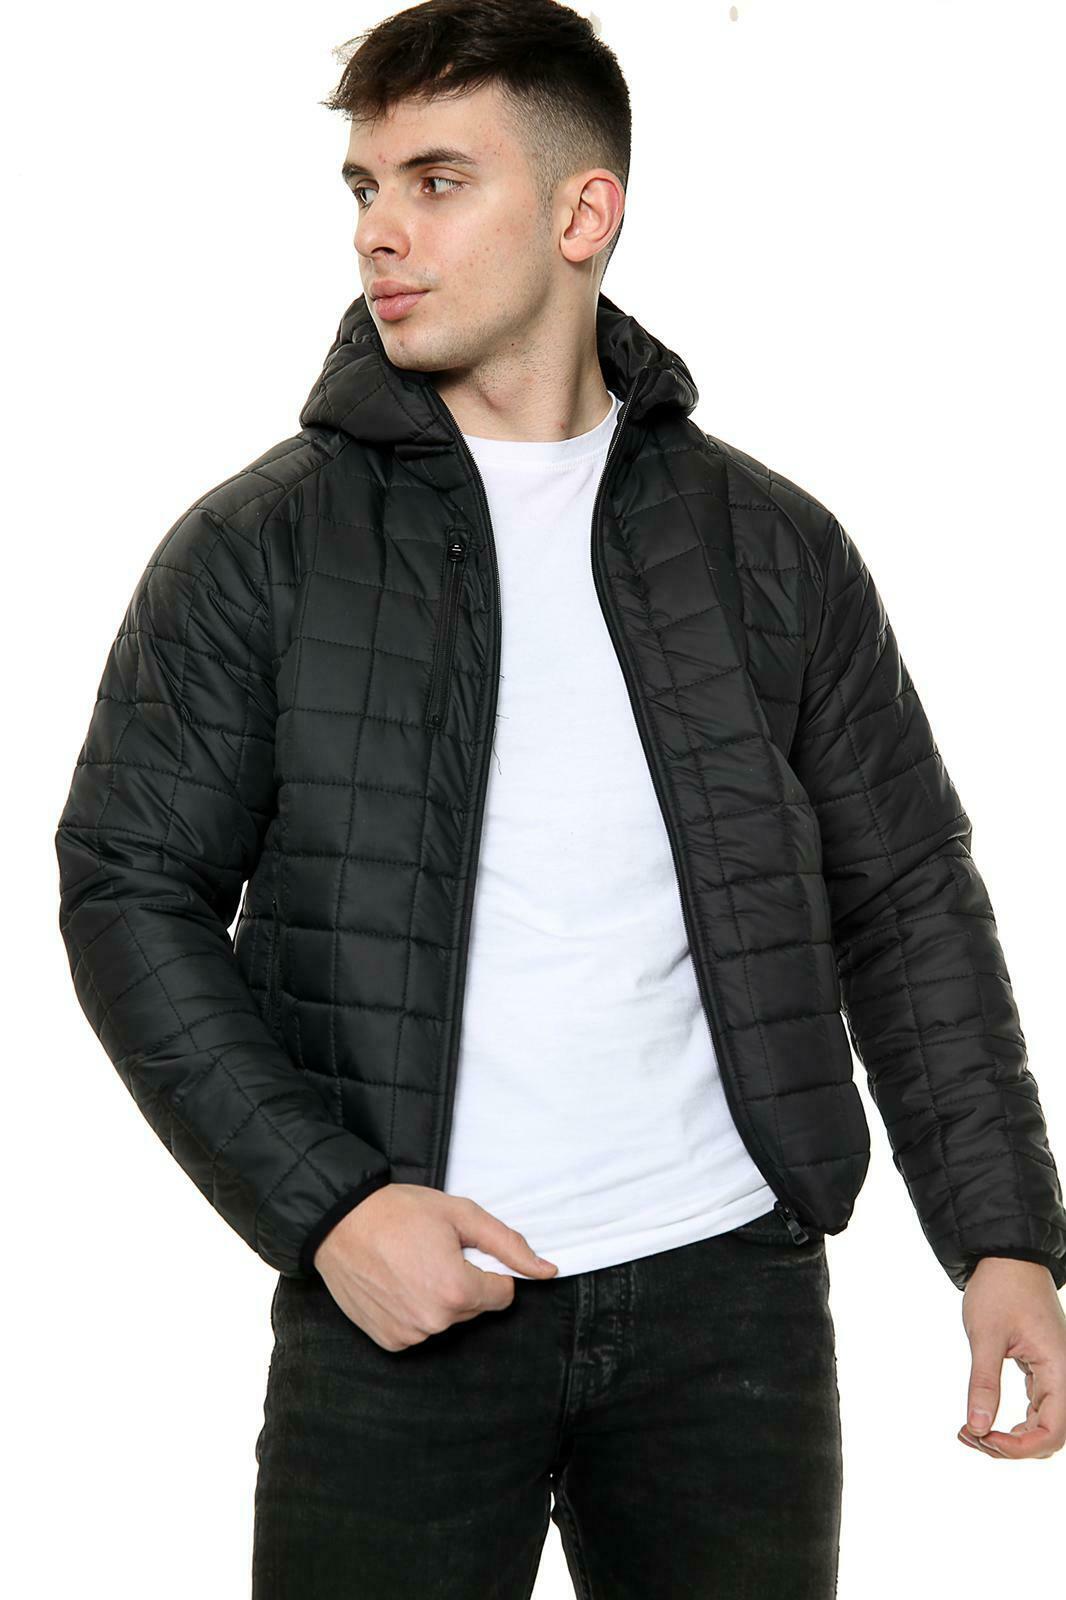 Men's Bubble Jackets With Hood In Black. They Are Front Zip Fastening With 2 Side Pockets A Breast Outer Pocket And Also An Inner Pocket. Available In Navy Also From Size Small With Chest Size Of Up To 42" To A 2 X _large Which Goes Up To A Chest Size Of Up To 50"